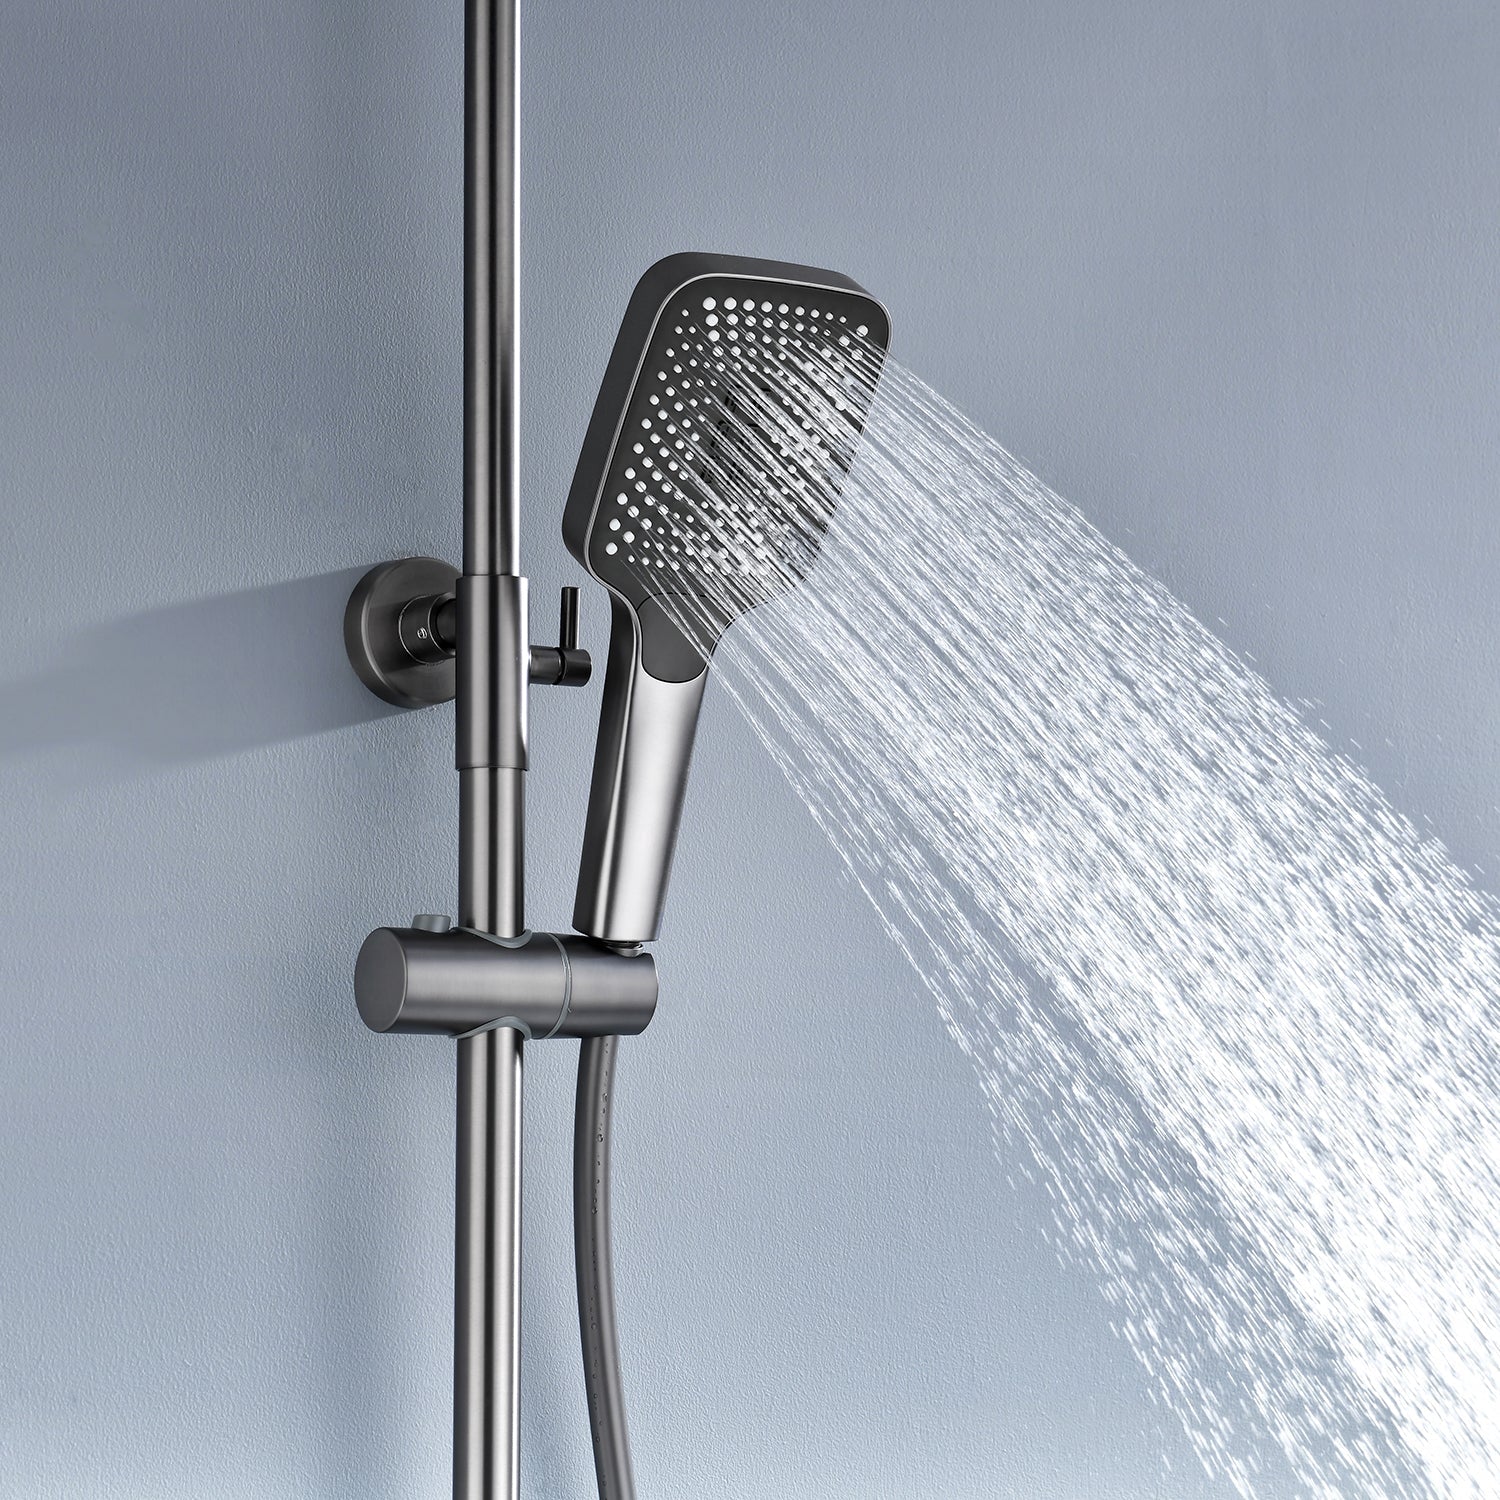 Lefton All-In-One Shower System with 5 Water Modes and Temperature Display Screen